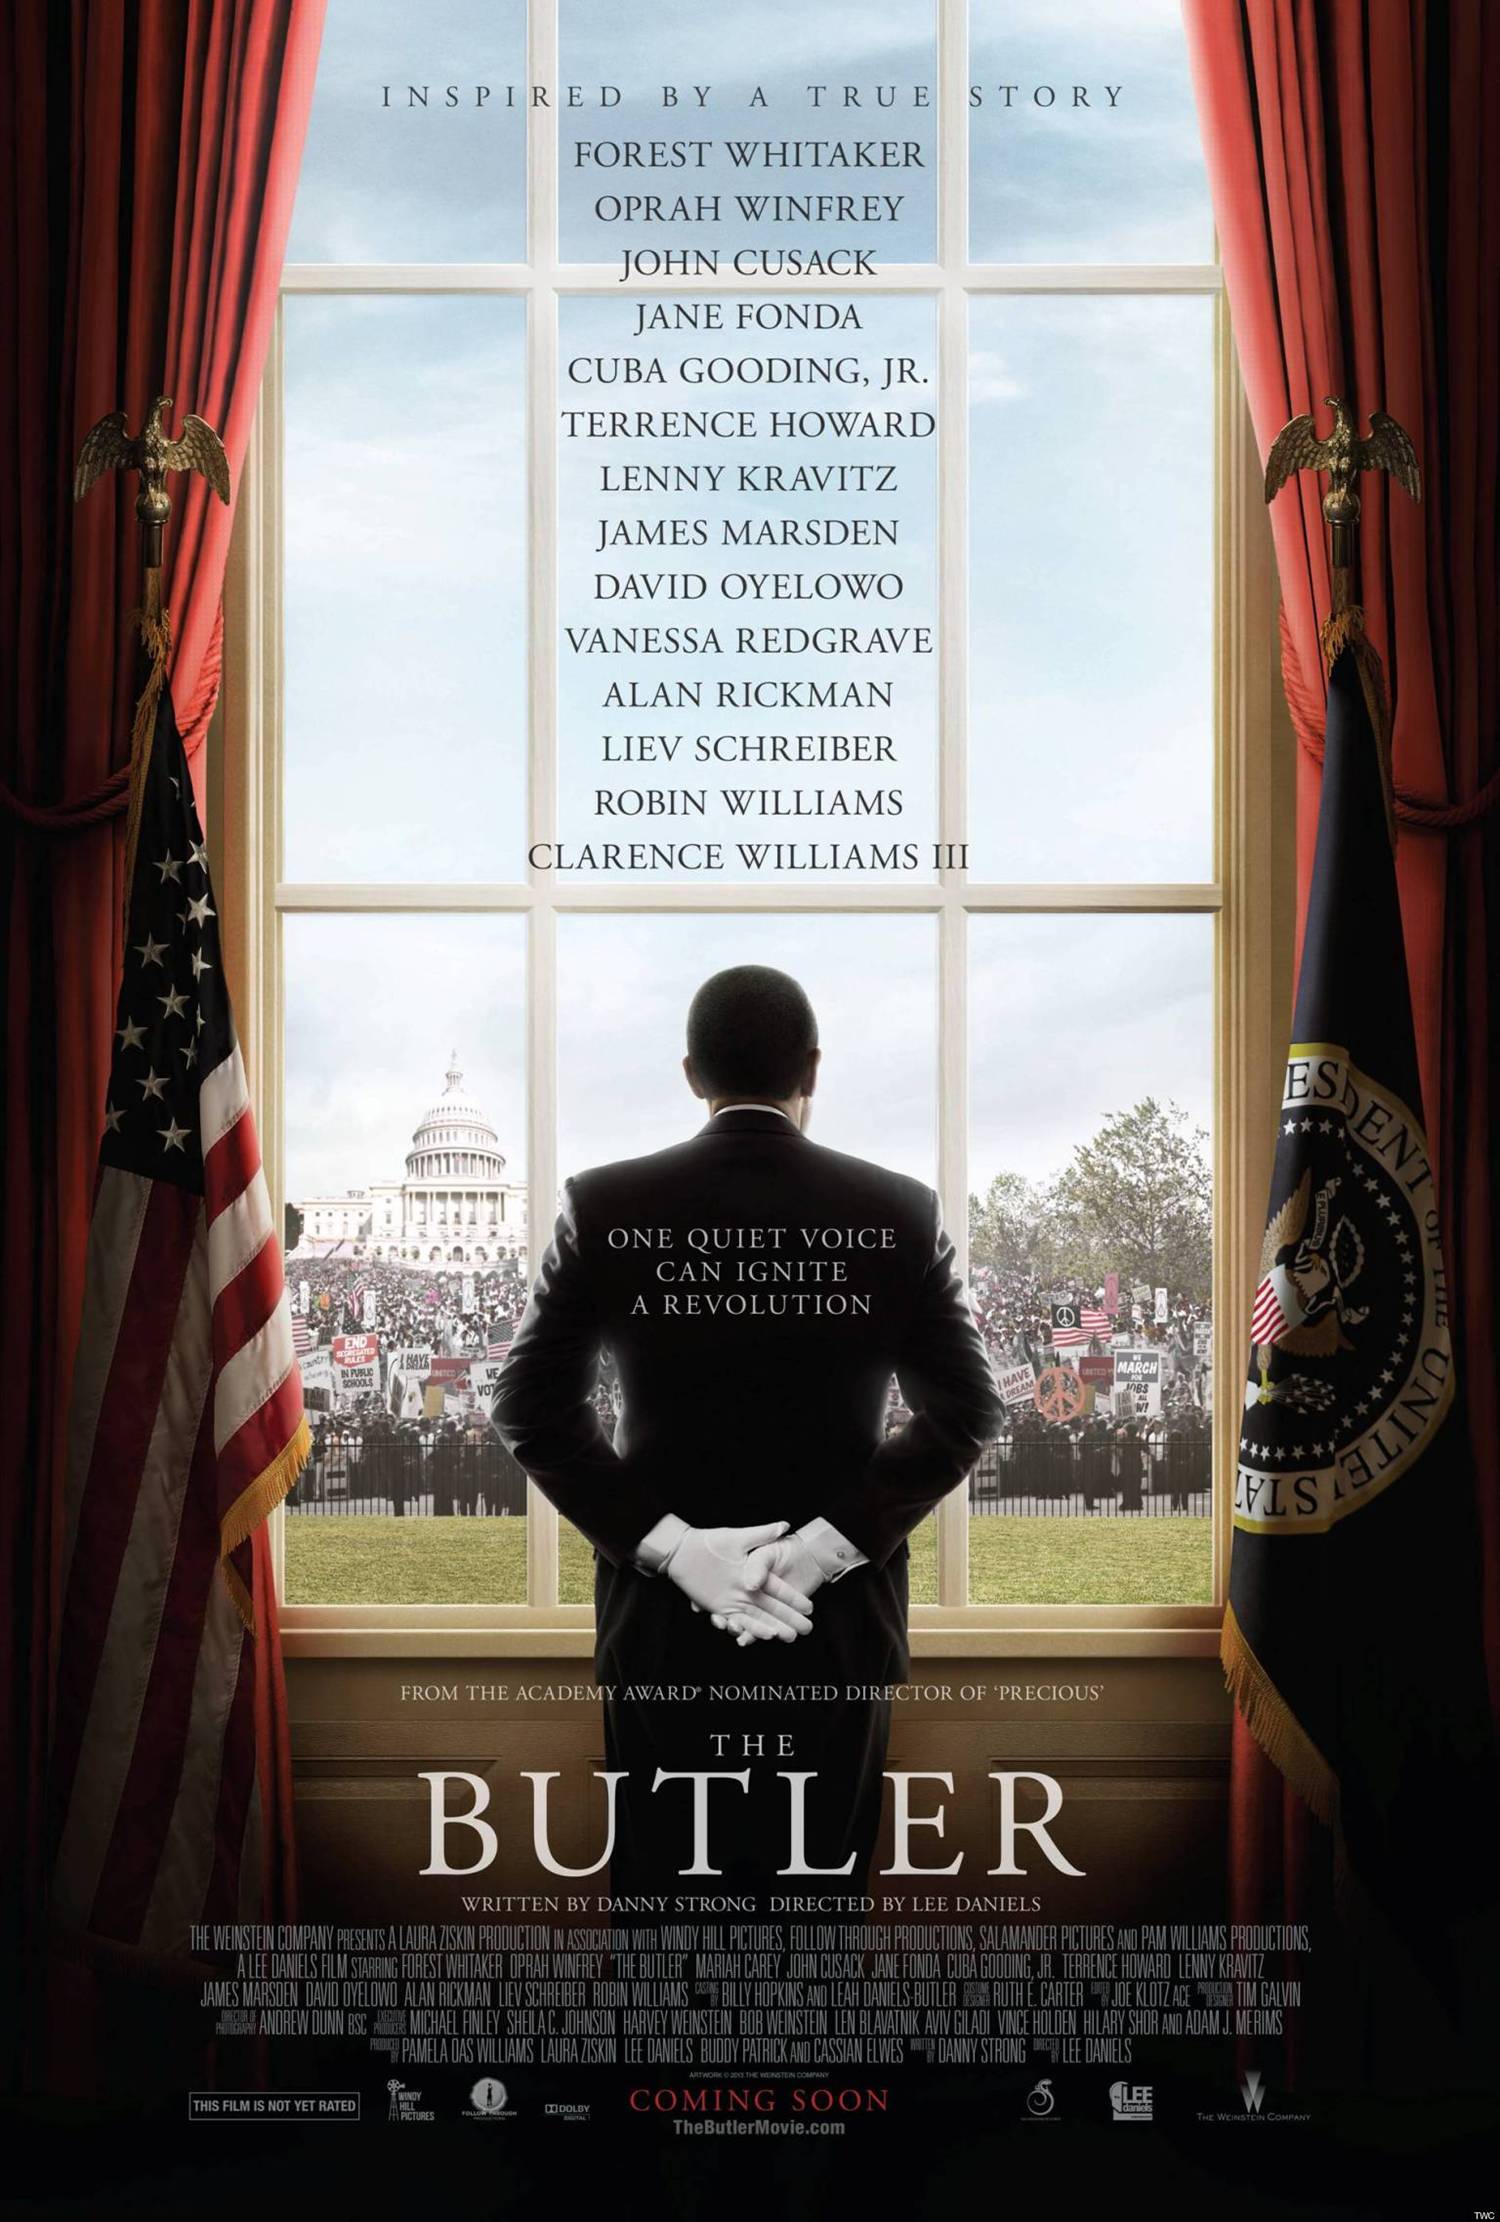 THE BUTLER Movie Review